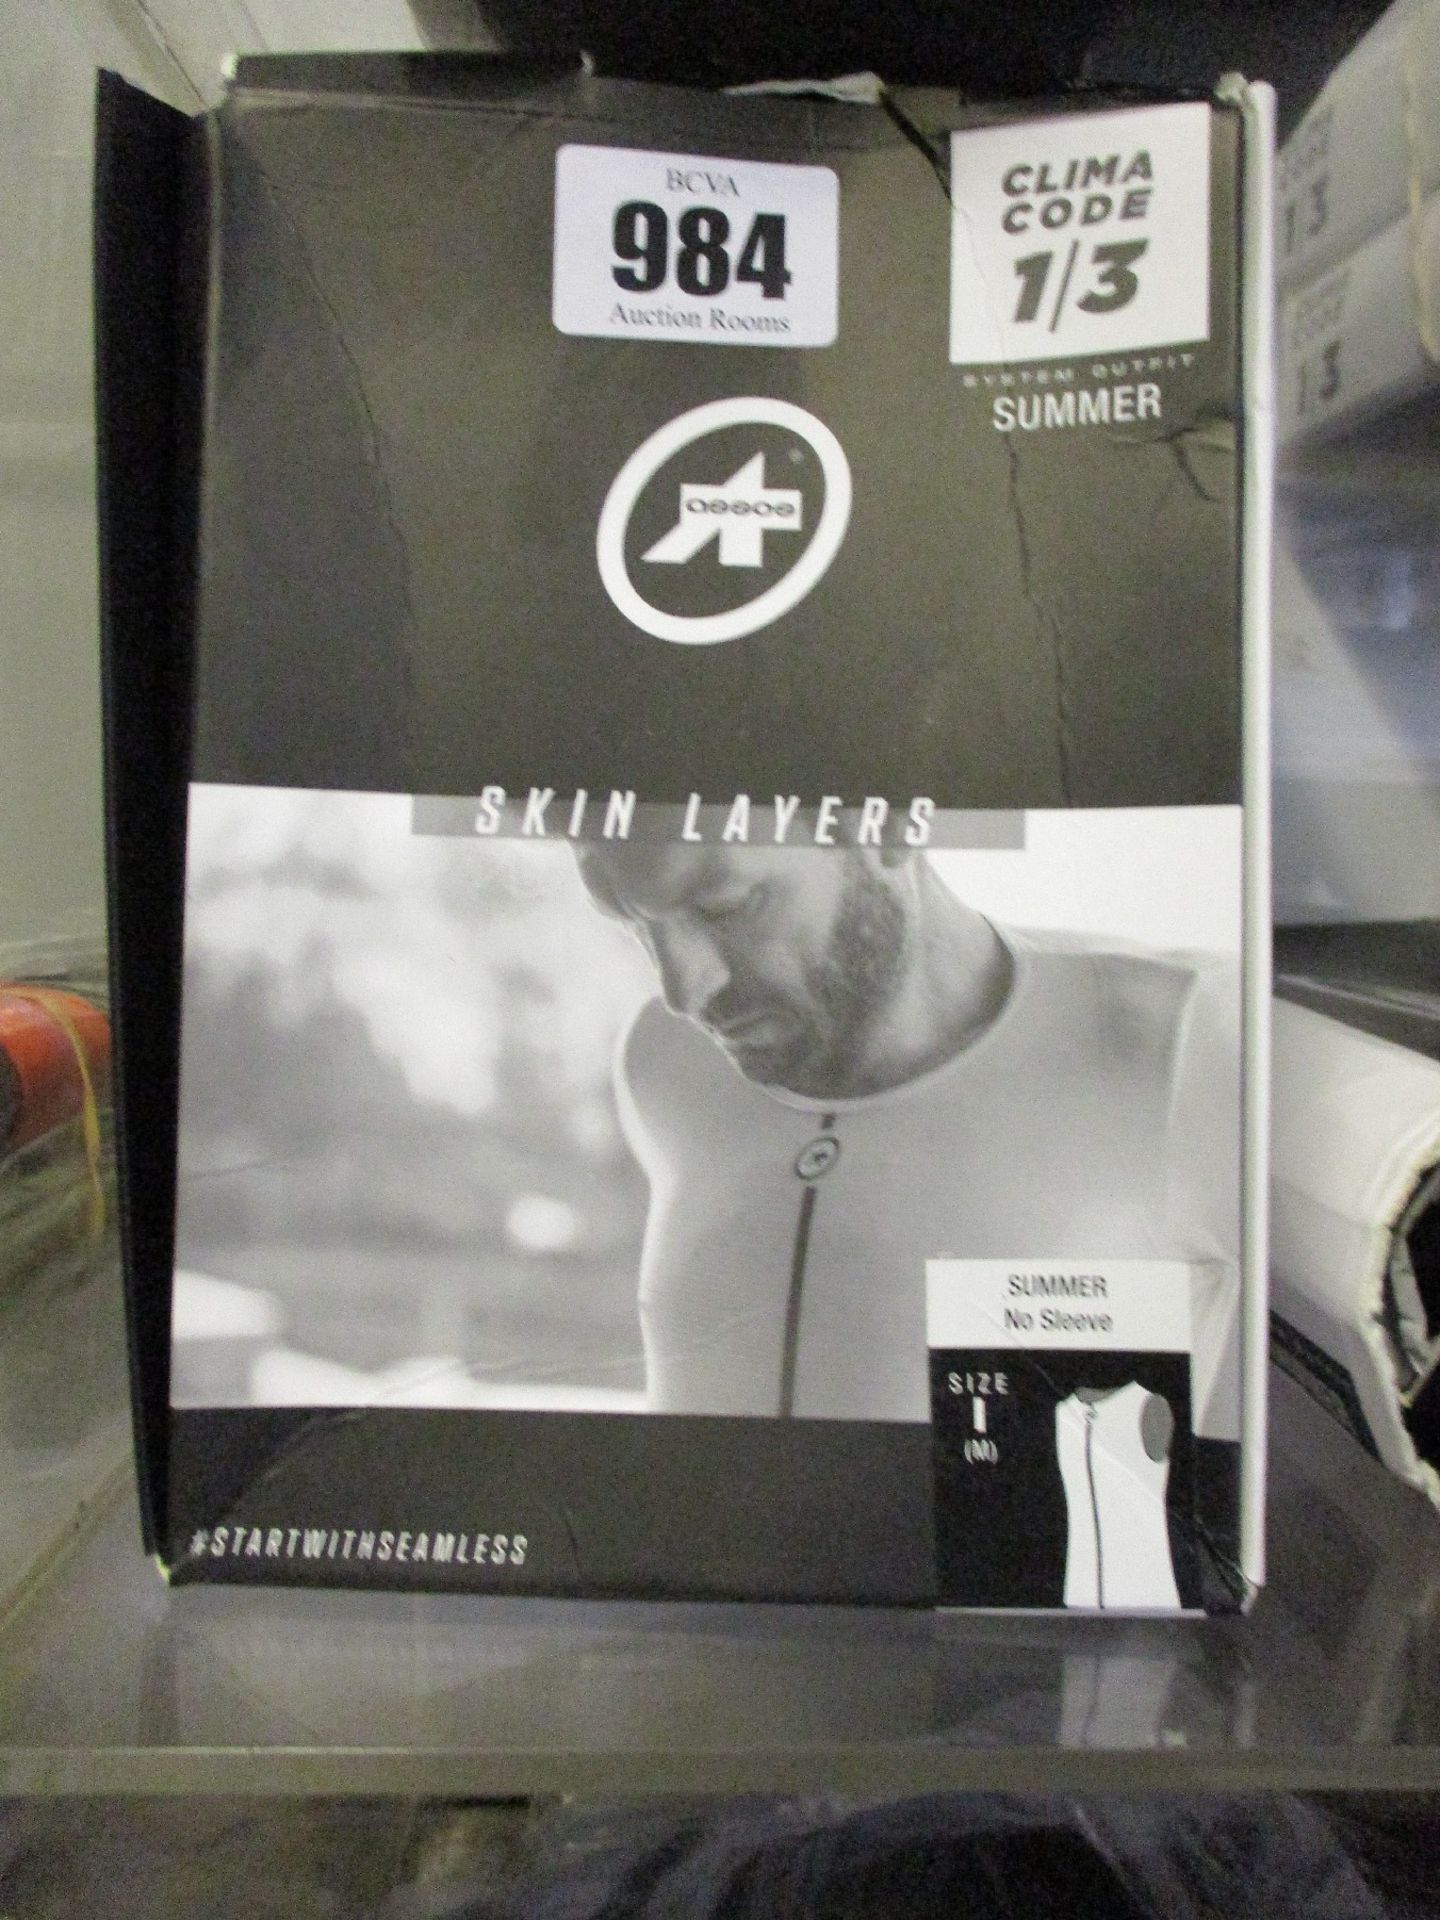 Six as new Assos Summer Skin Layers, no sleeves (Sizes 2x M, 2x L-XL and 2x XLG).